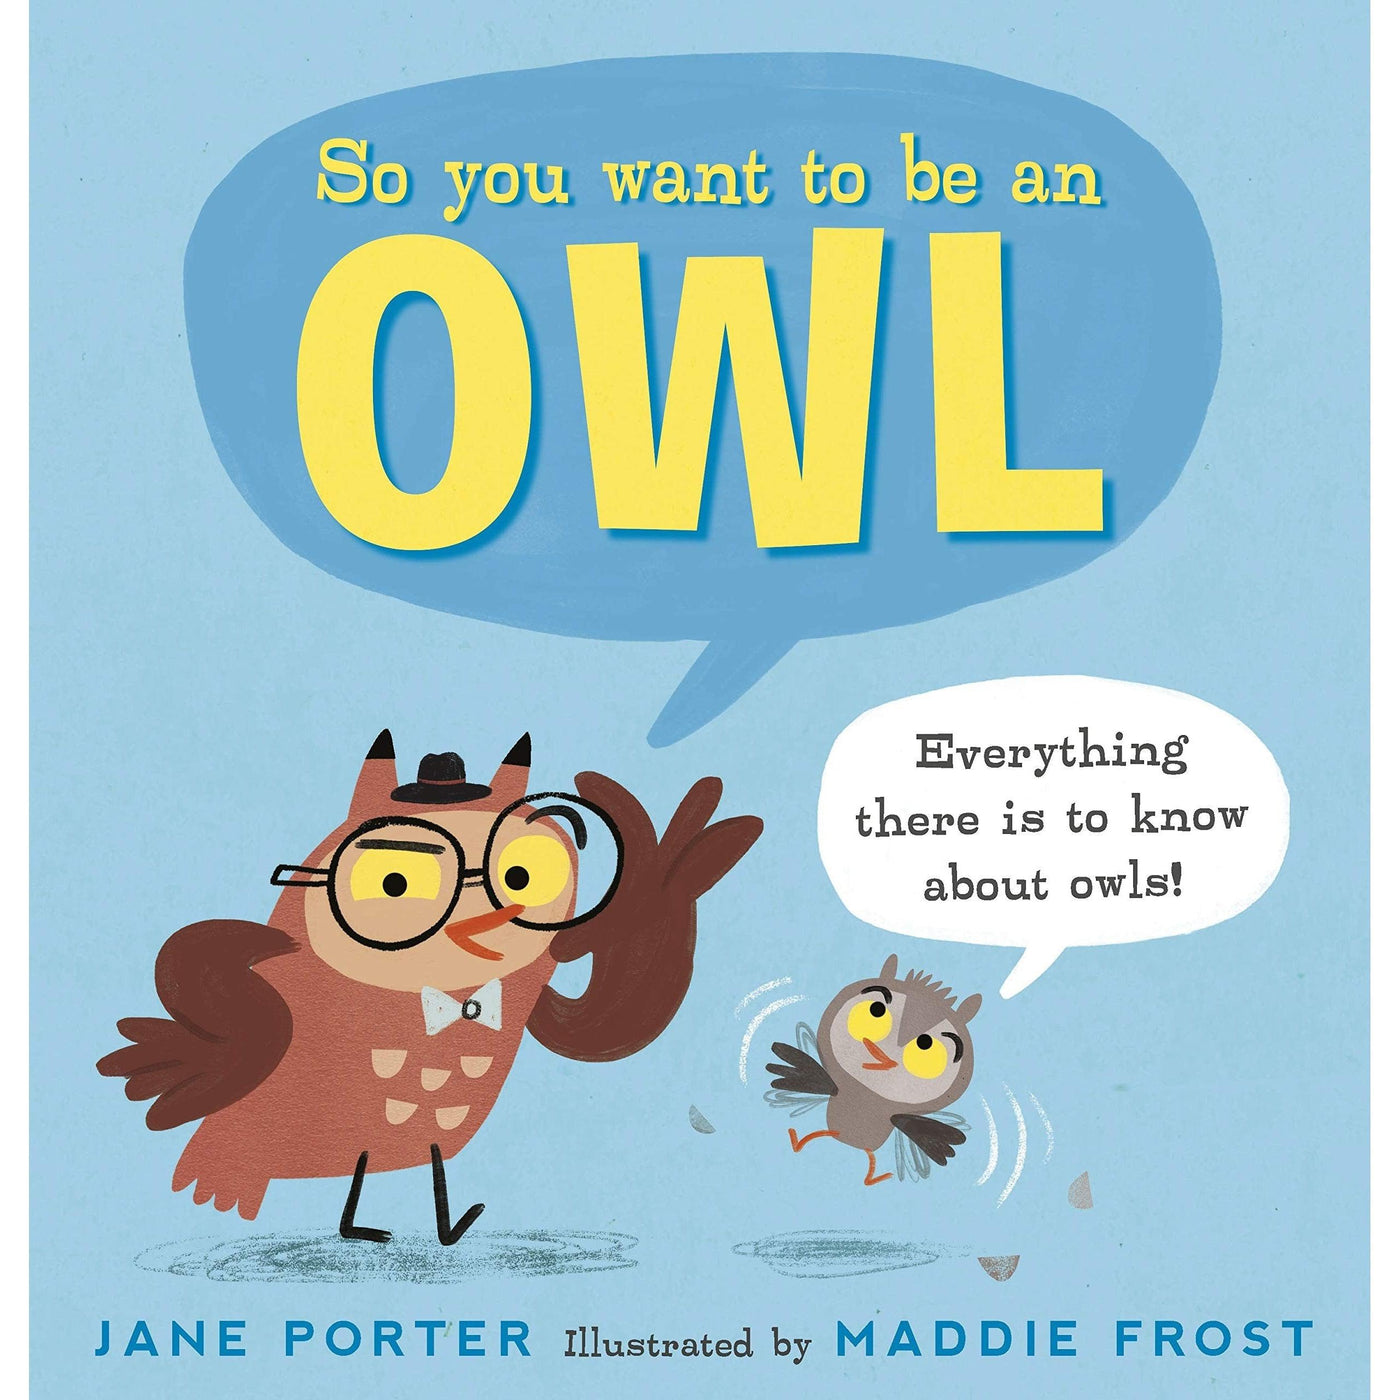 So You Want To Be An Owl - Jane Porter & Maddie Frost